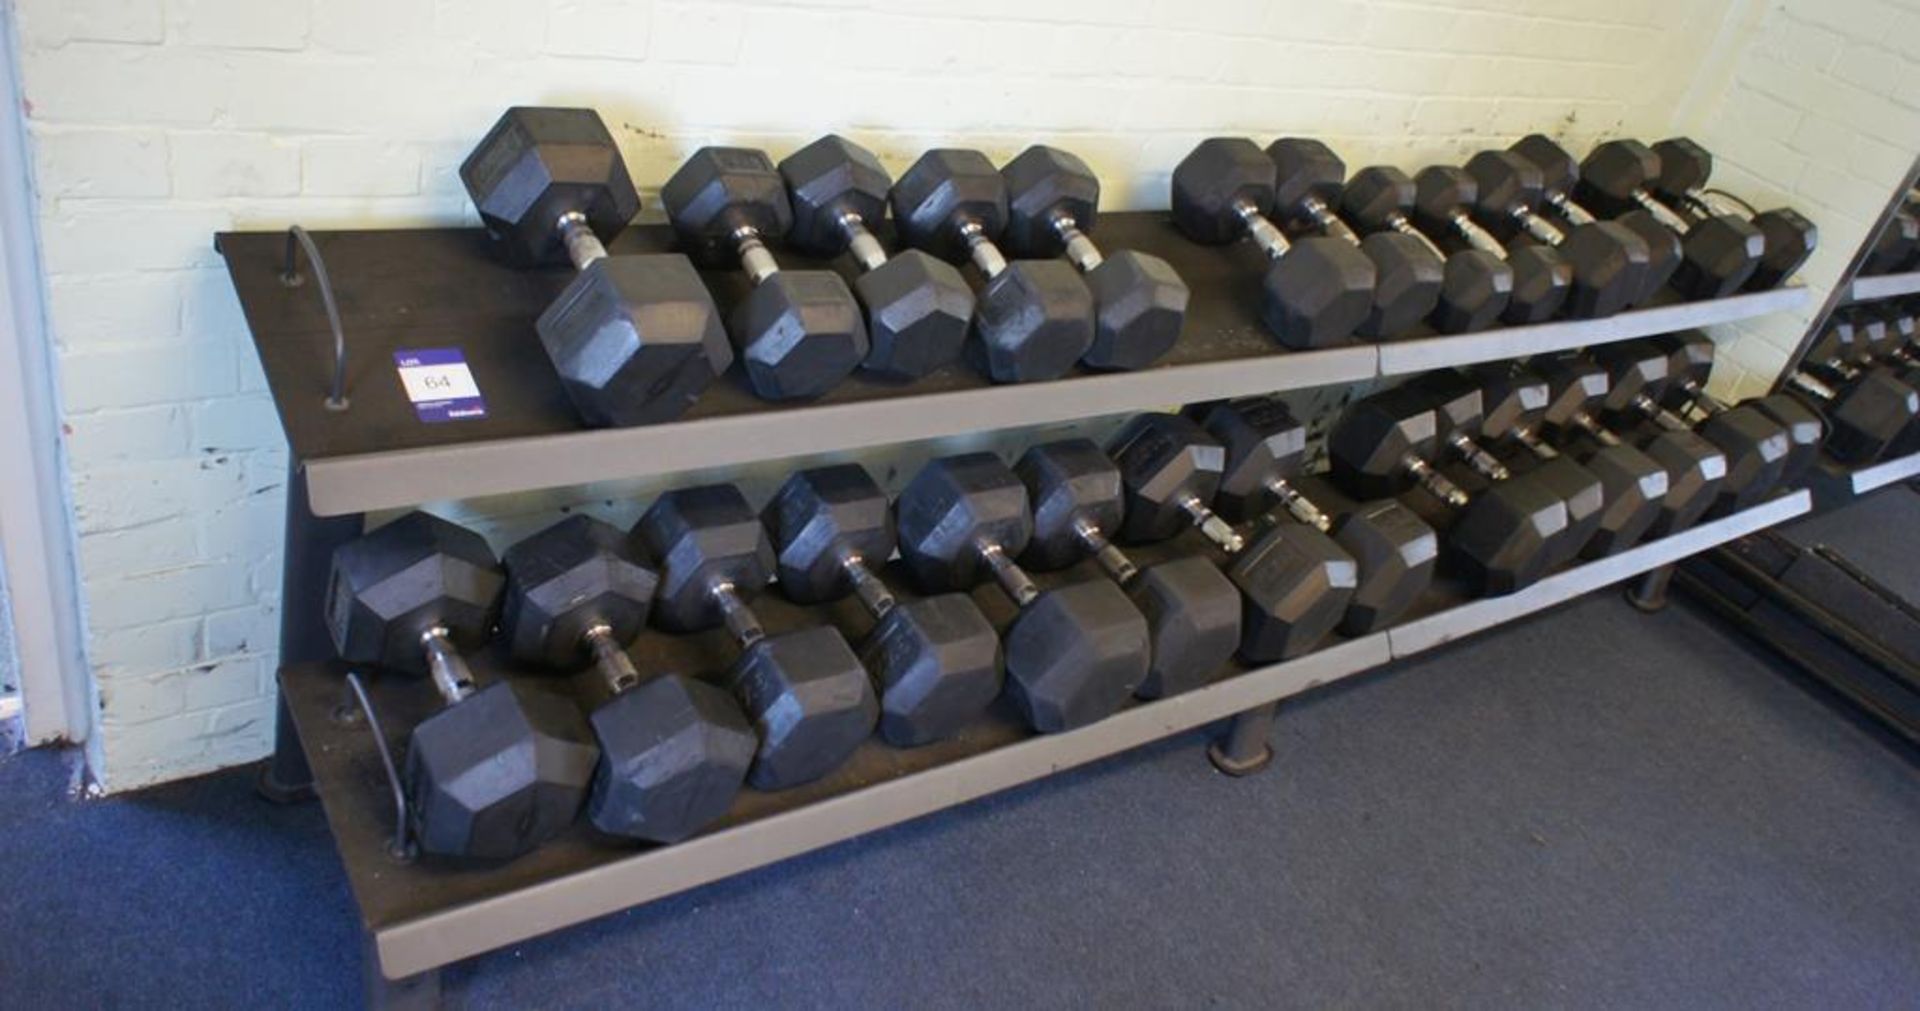 * Small Gym 2 Tier Dumb Bell Rack with 27 Tufftech Dumb Bells Weight Range 10Kg to 40Kg. Please note